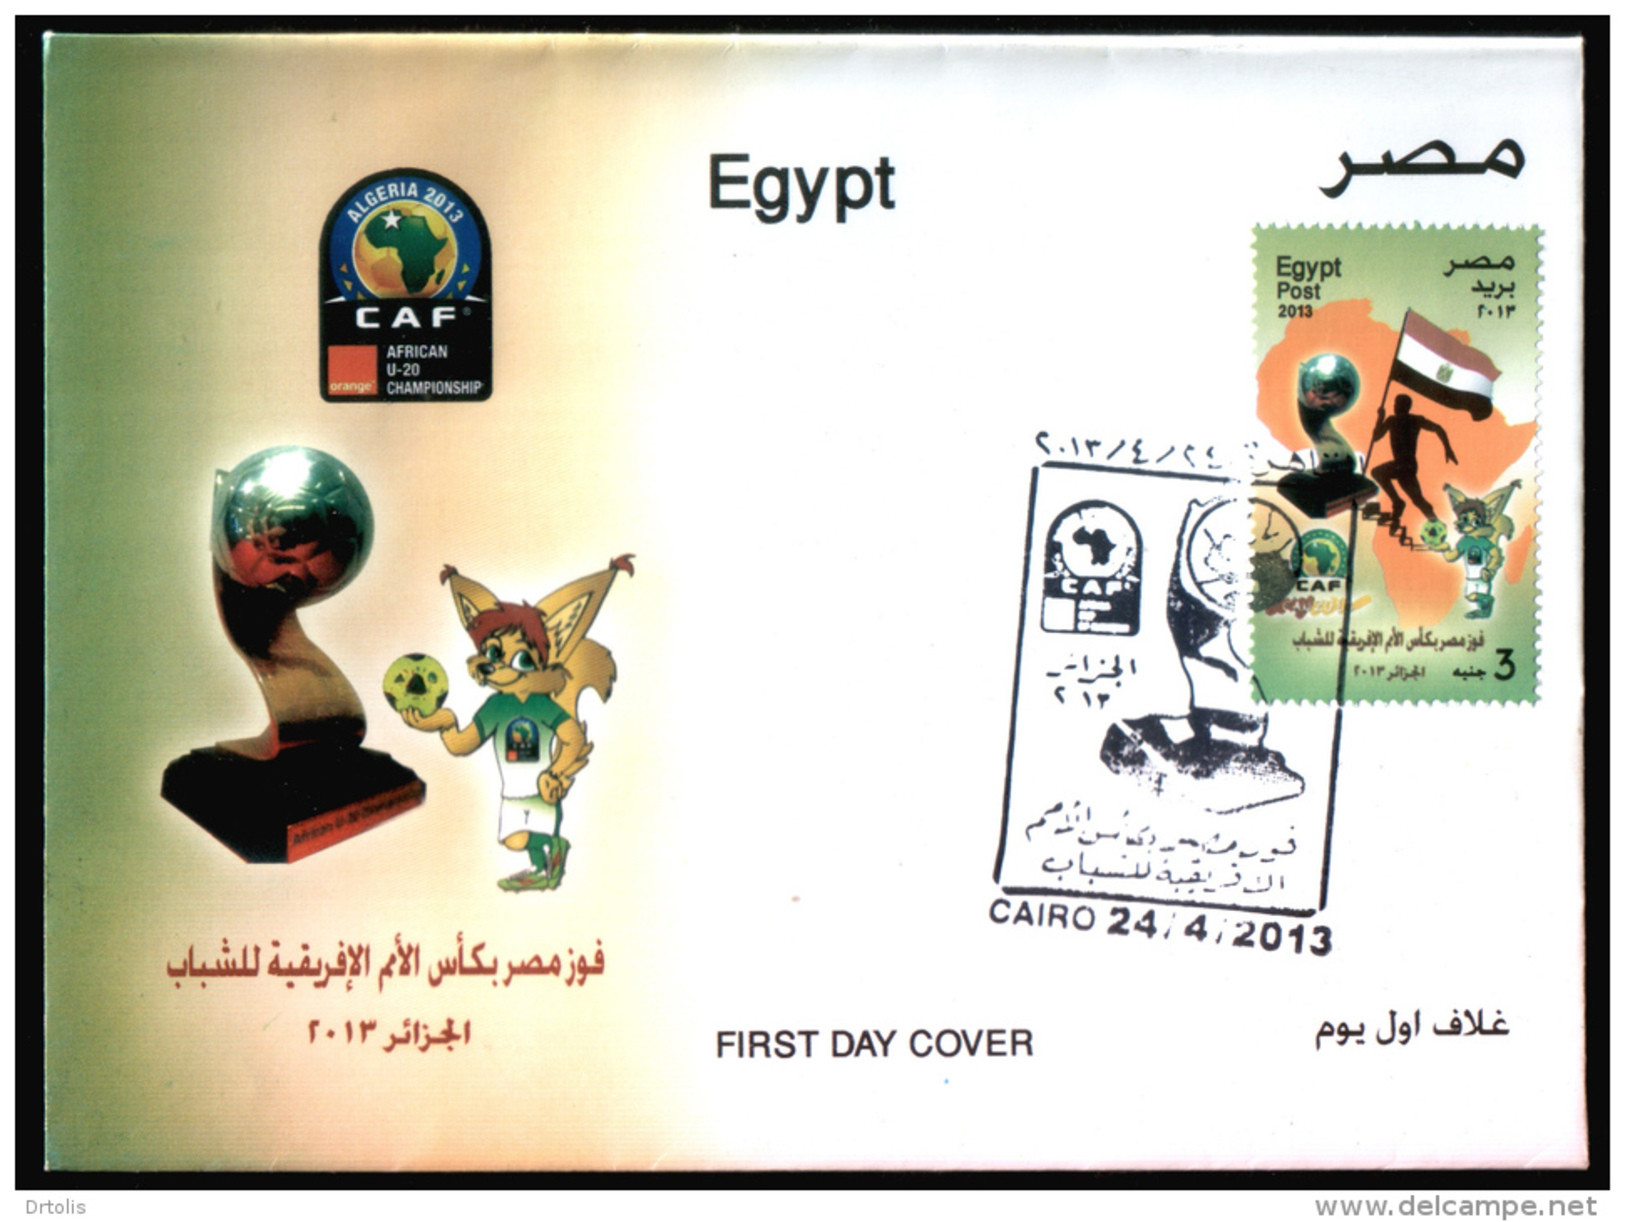 EGYPT / 2013 / SPORT / FOOTBALL / CAF / AFRICA CUP OF NATIONS SOCCER TOURNAMENT FOR YOUTH ; ALGERIA / MAP / FLAG / FDC - Briefe U. Dokumente